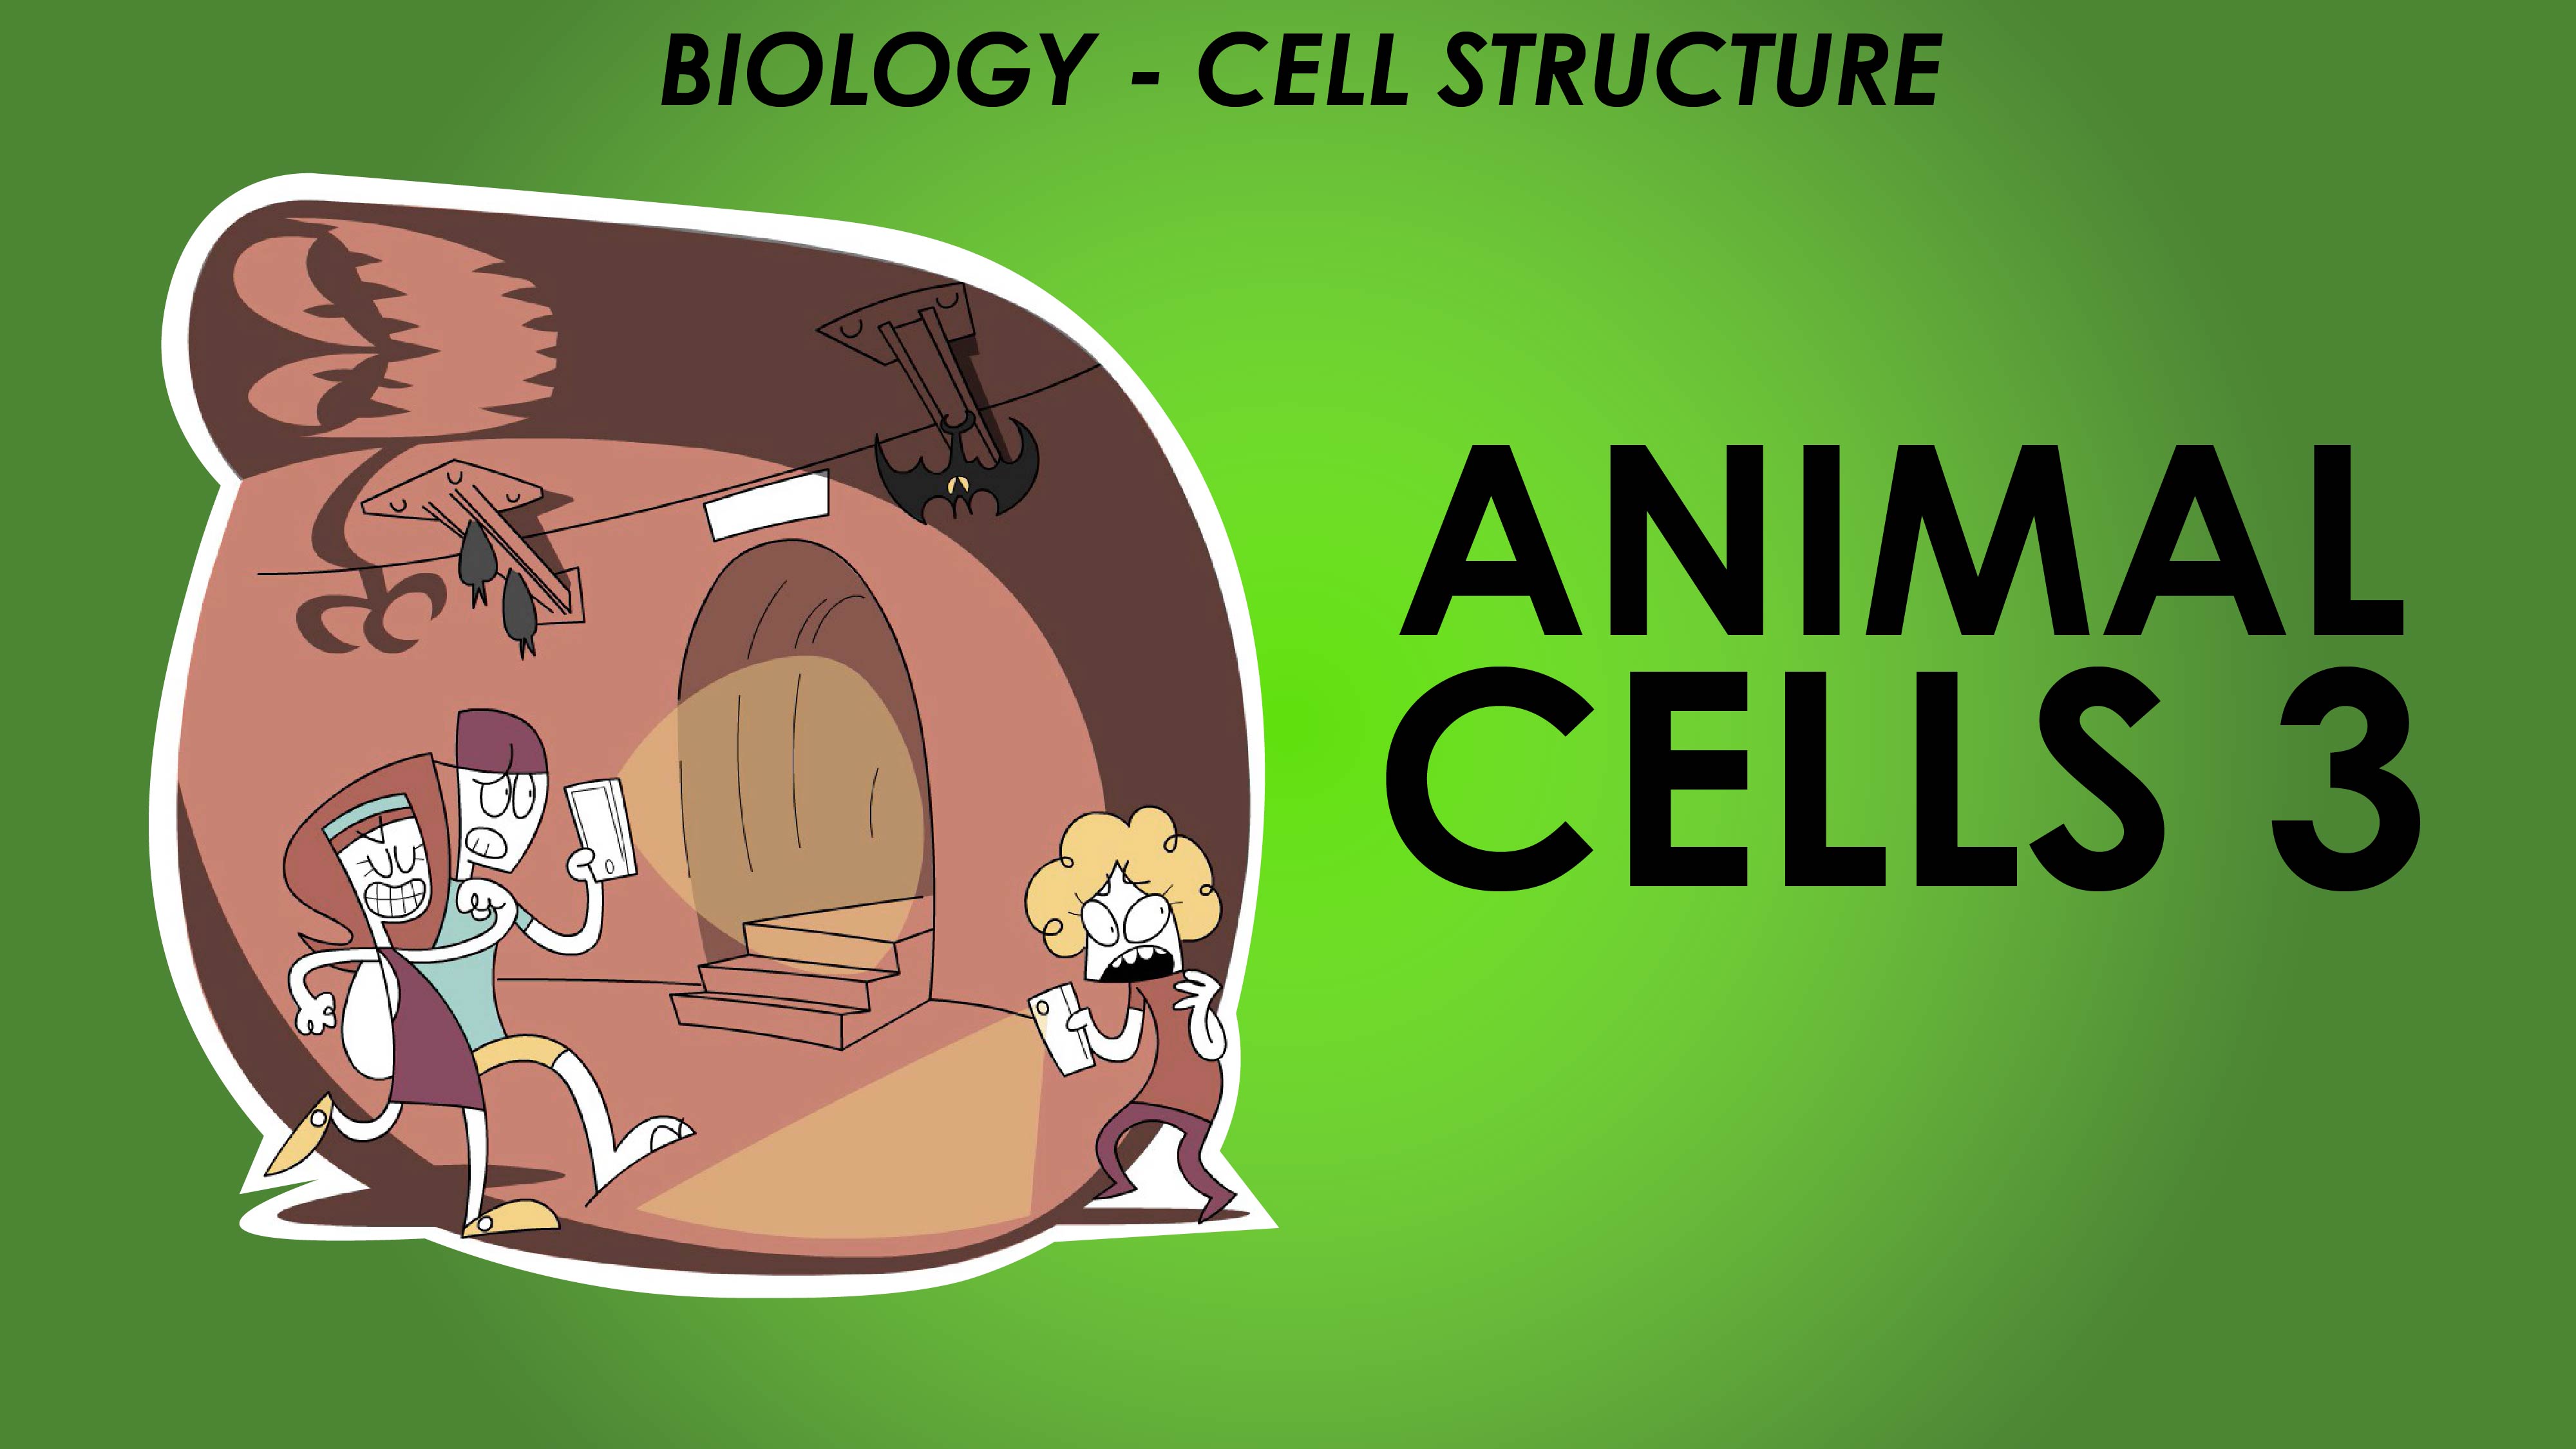 Animal Cells 3 - Cell Structure